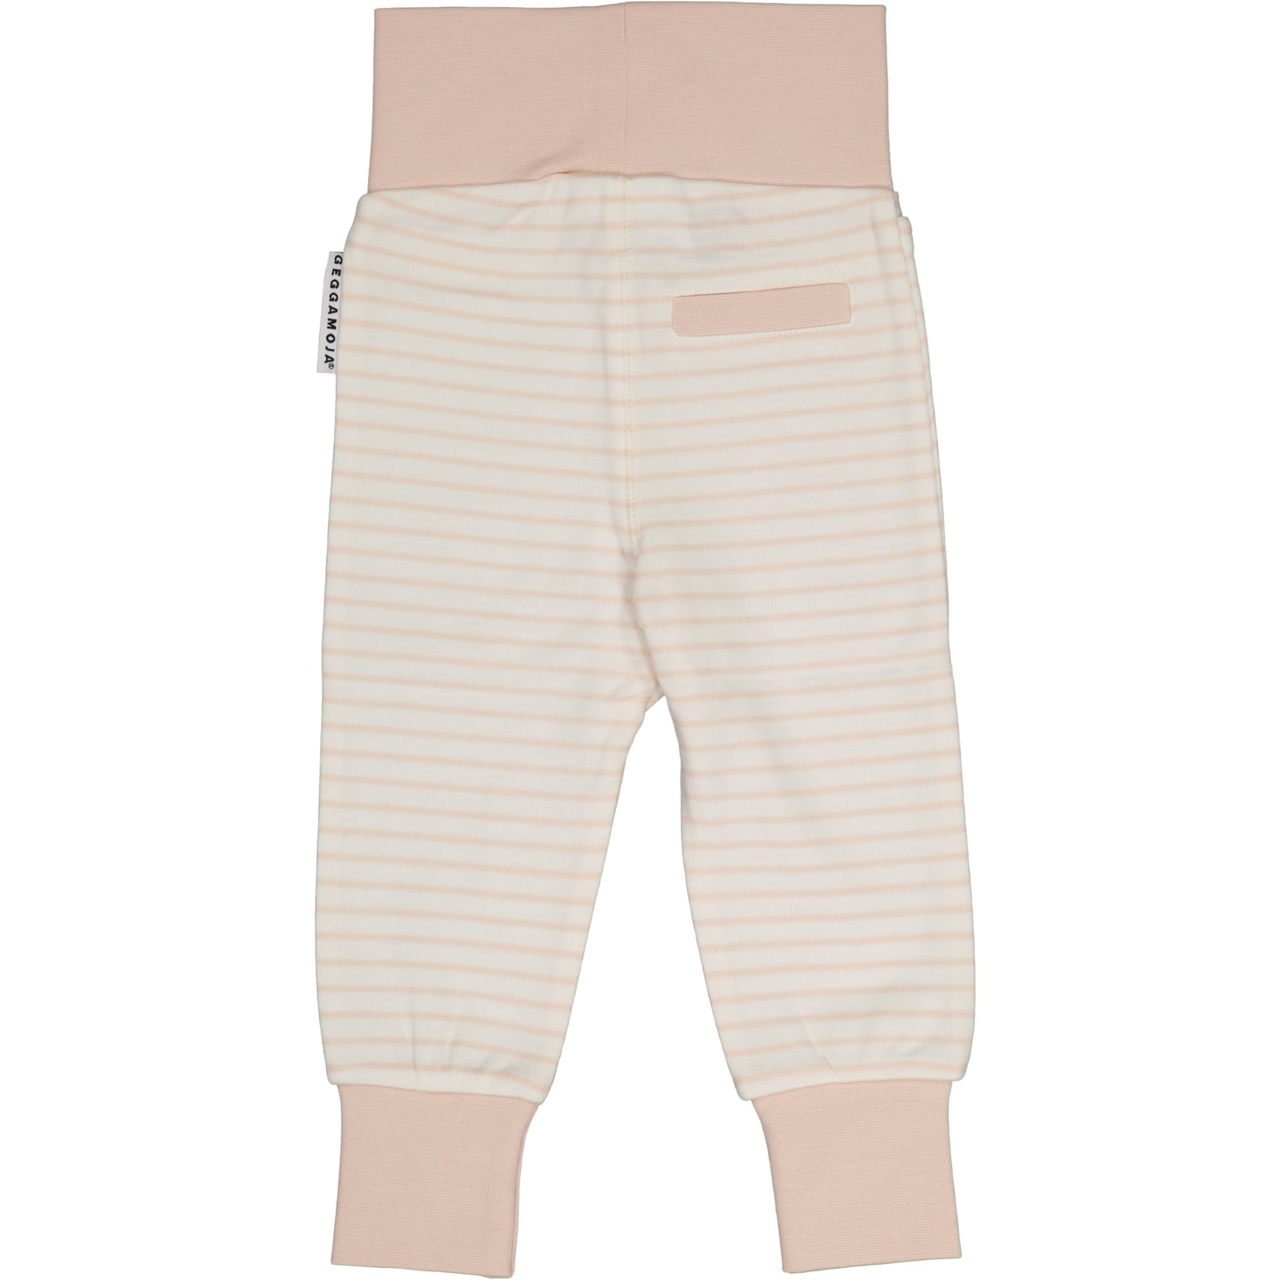 Baby trouser L.pink/offwhite 74/80